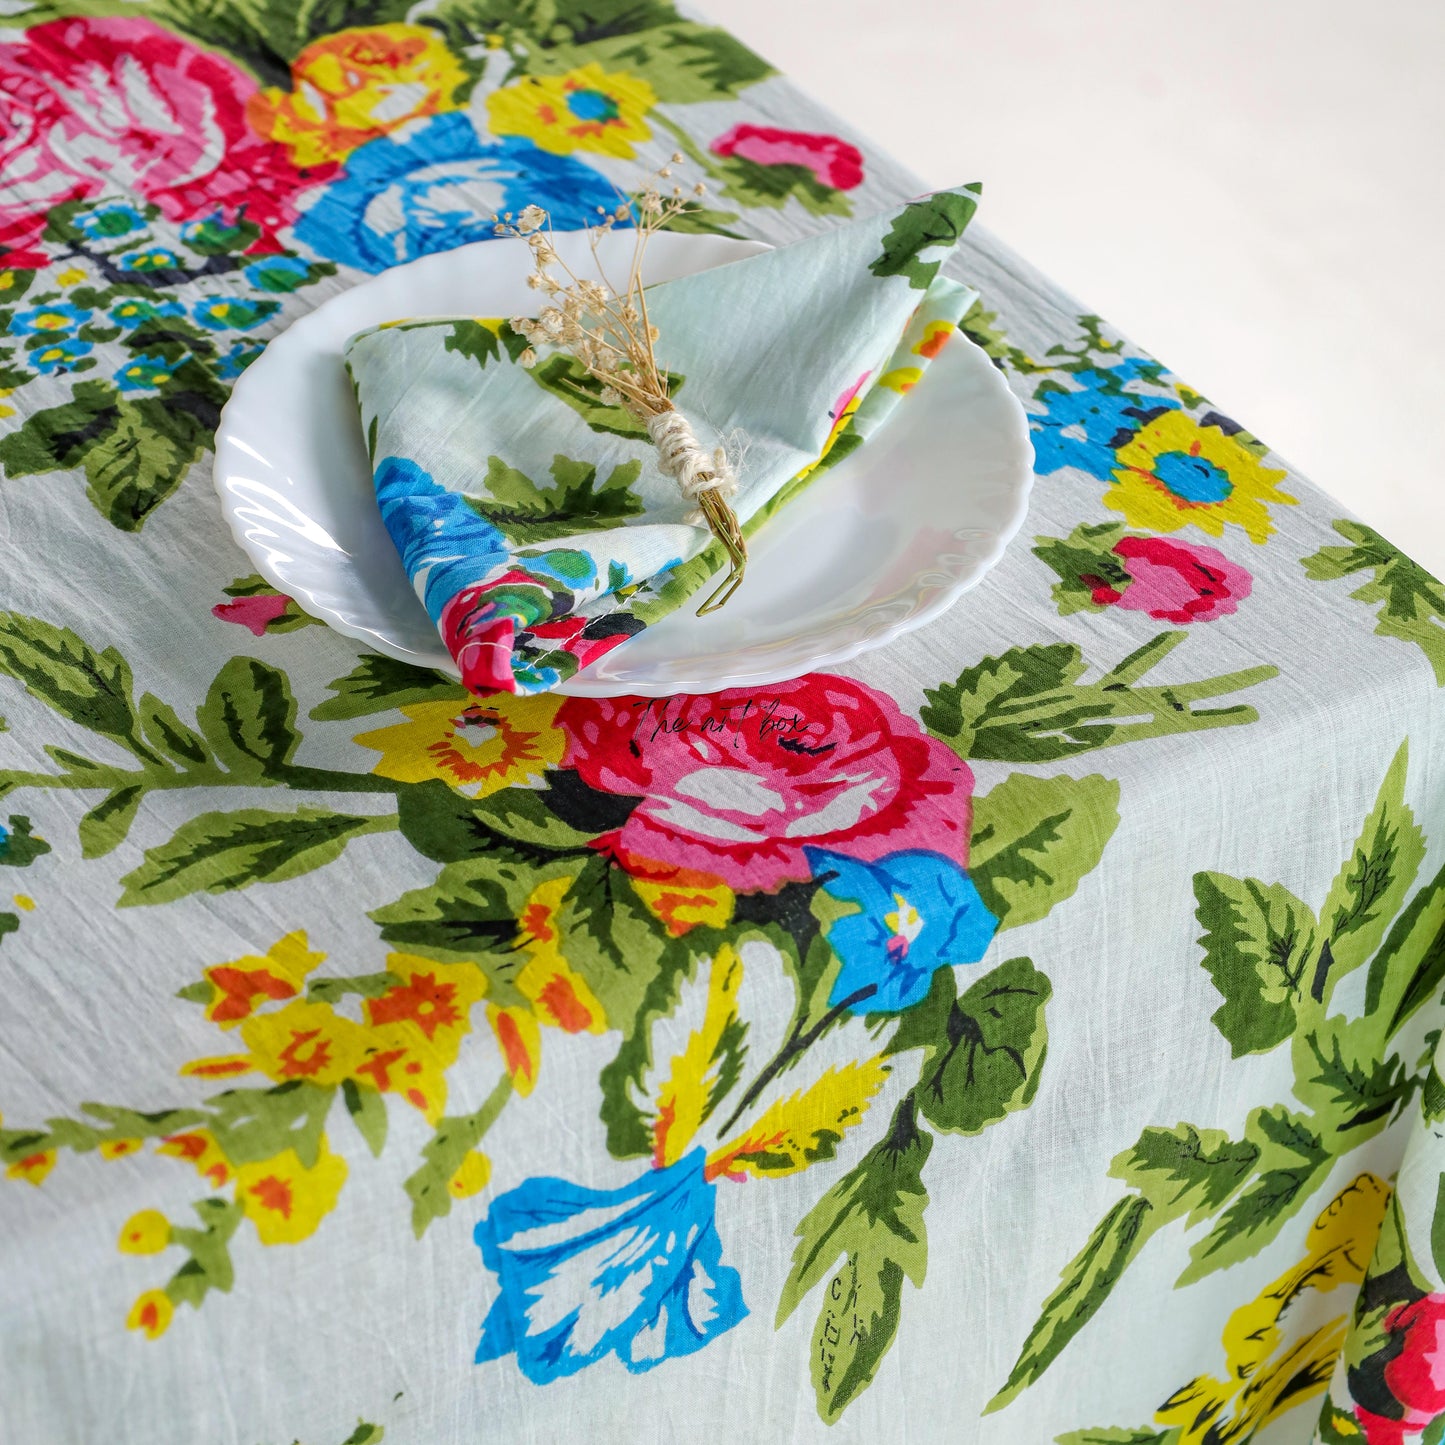 New Collection Of  Printed Table Cloth, White Floral Printed Cotton Table Cover